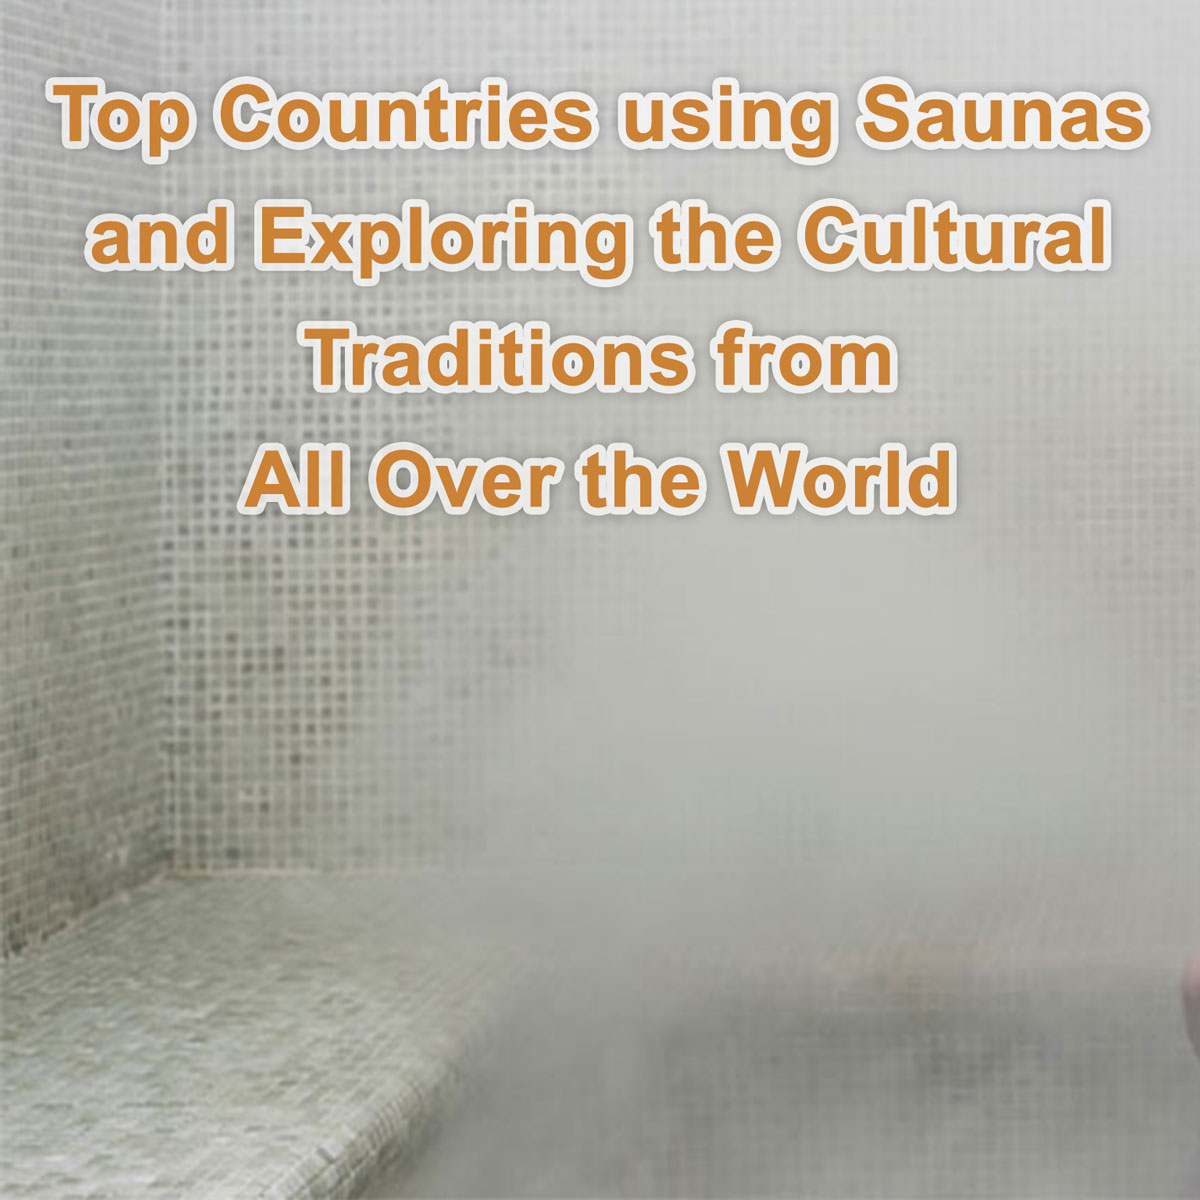 Top Countries using Saunas and Exploring the Cultural Traditions from All Over the World